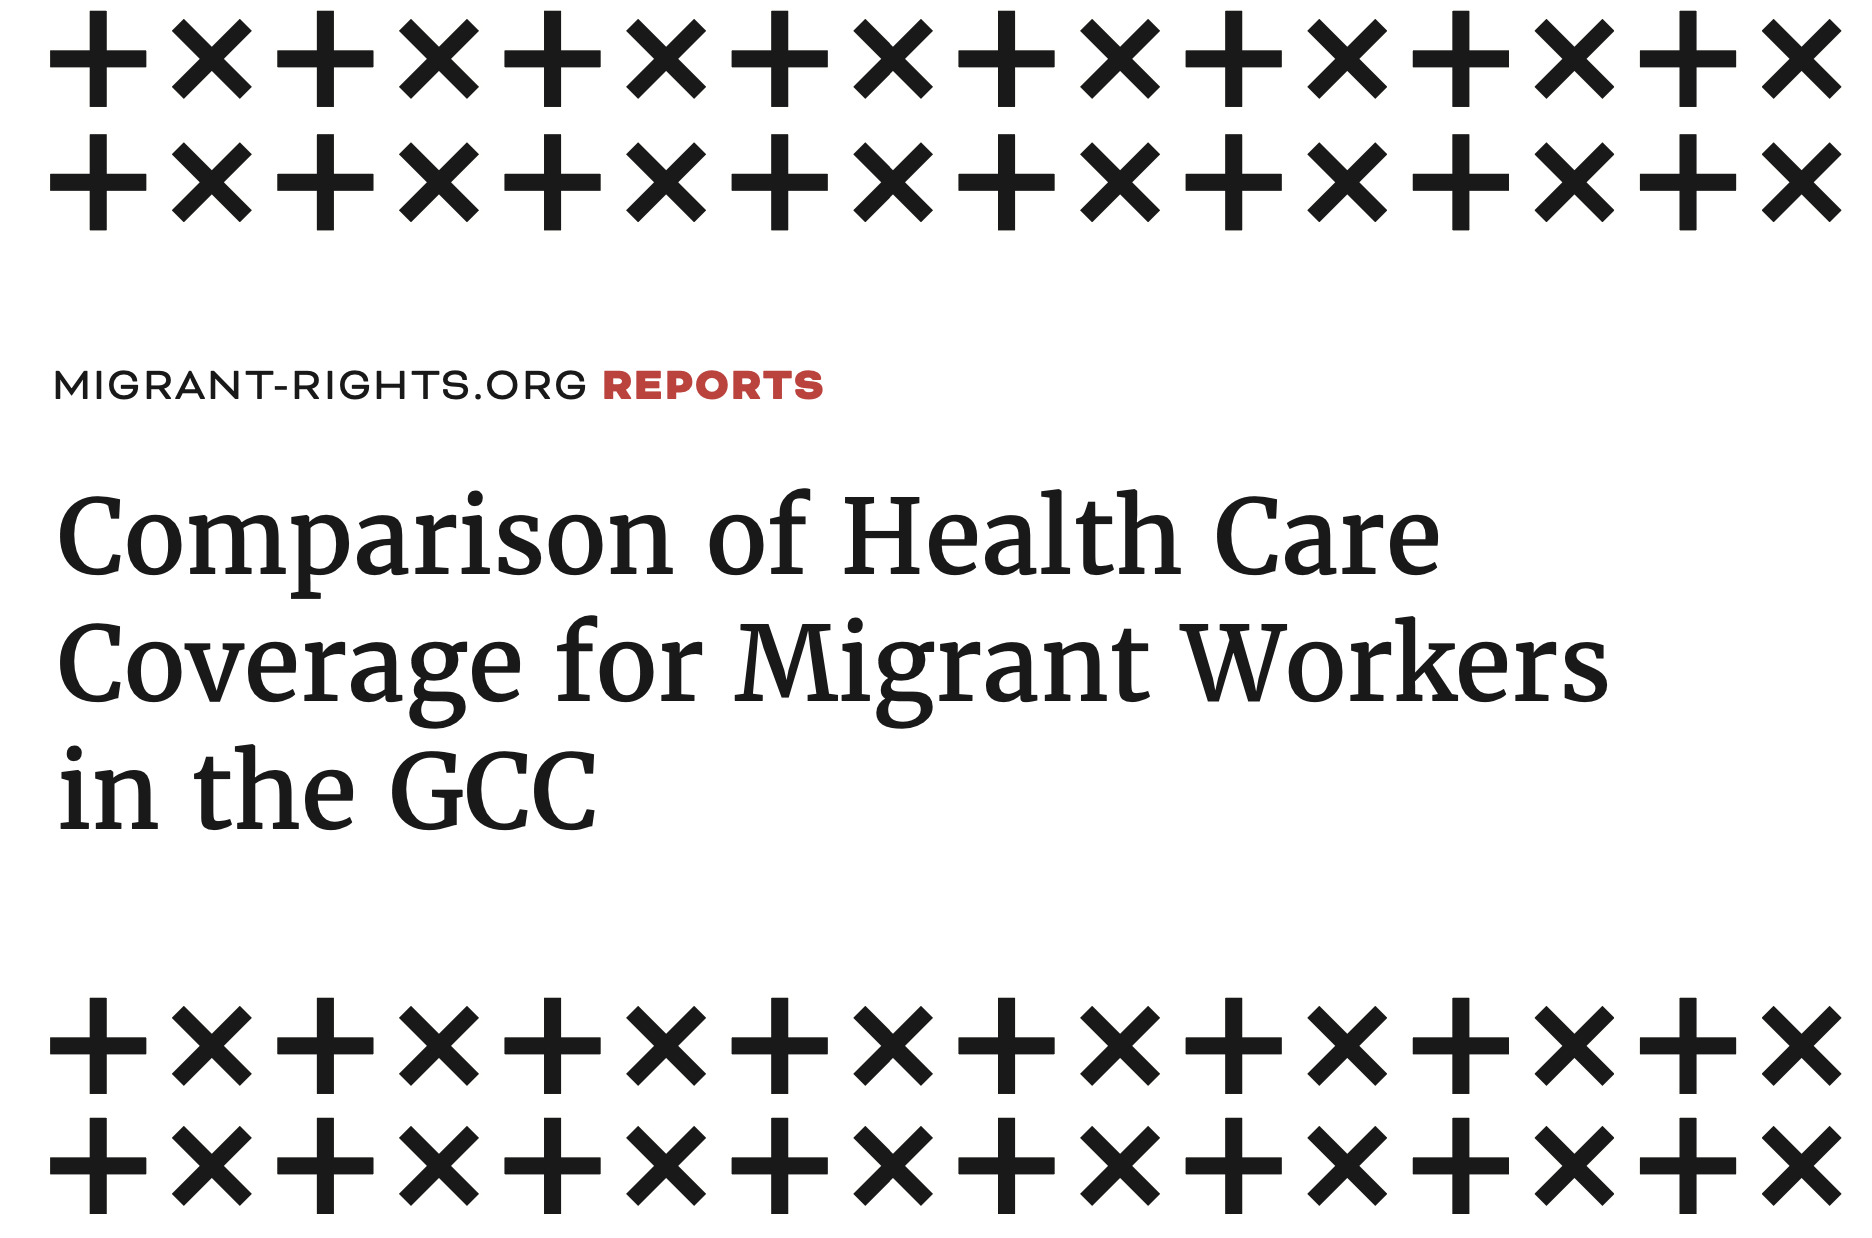  Comparison of Health Care Coverage for Migrant Workers in the GCC 